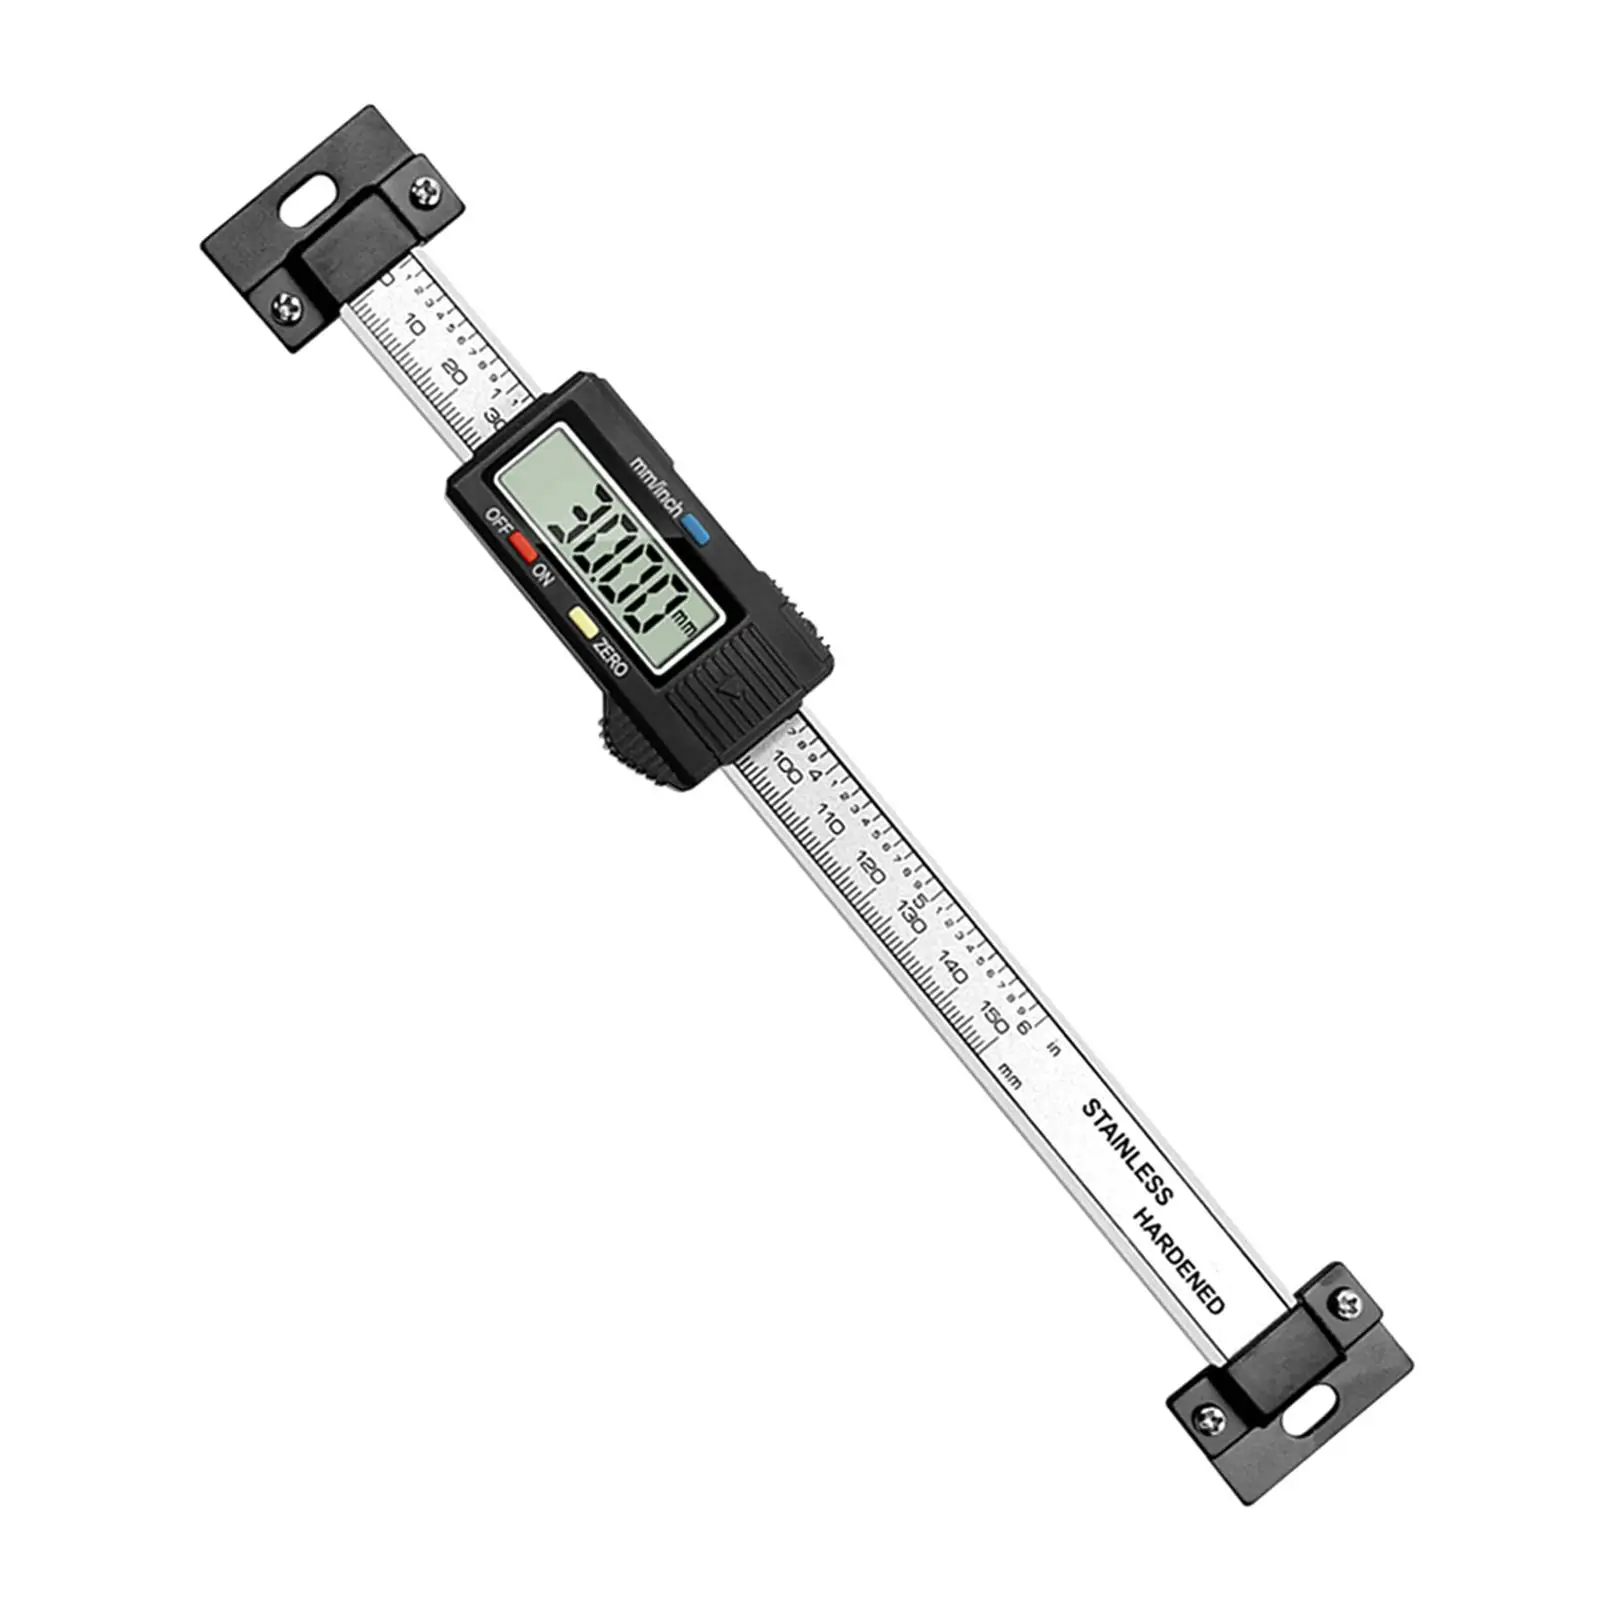 Horizontal Ruler Accurate Digital with LCD Display for Industrial Assembly